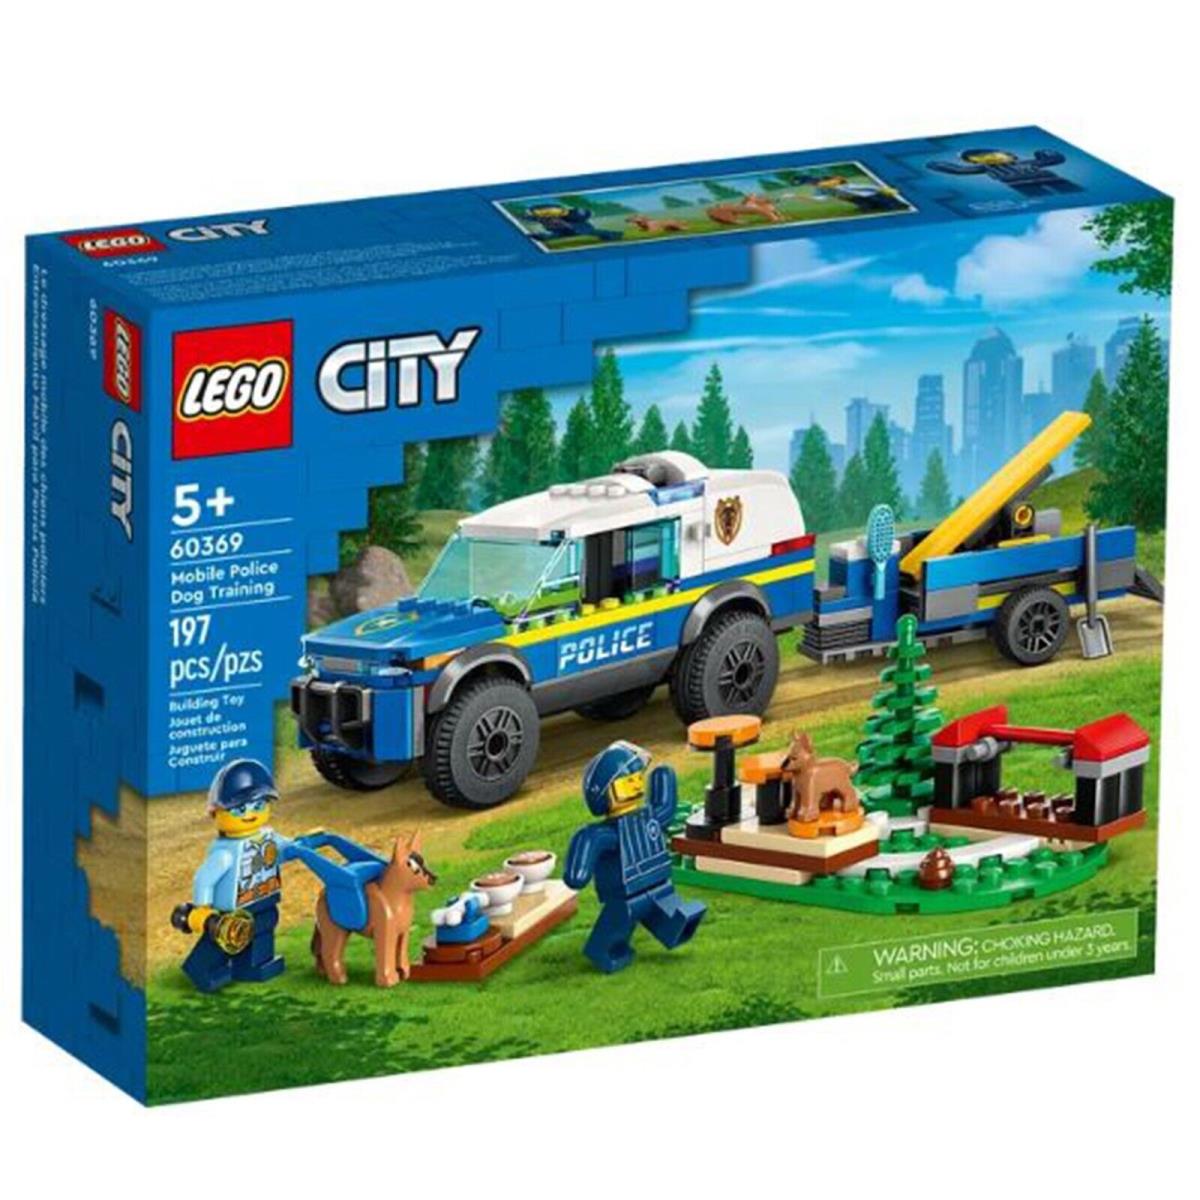 Lego City Mobile Police Dog Training Building Set 60369 IN Stock